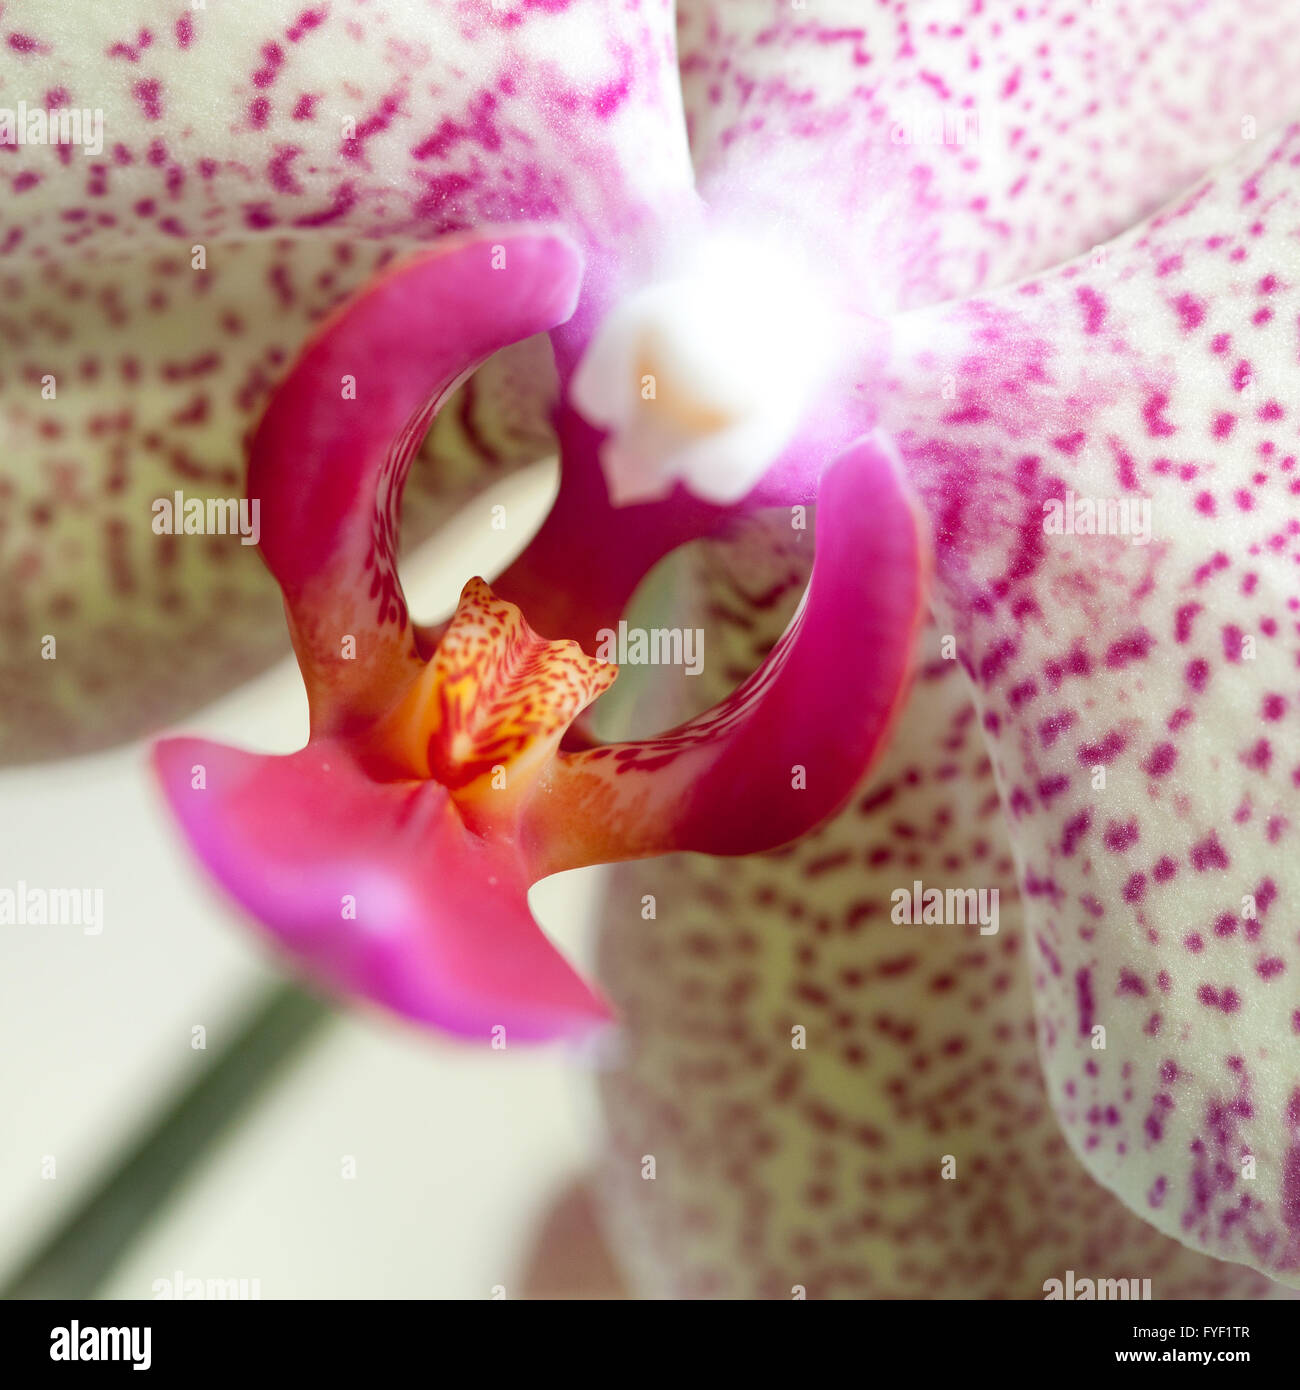 Sprig of orchid in their natural habitat Stock Photo